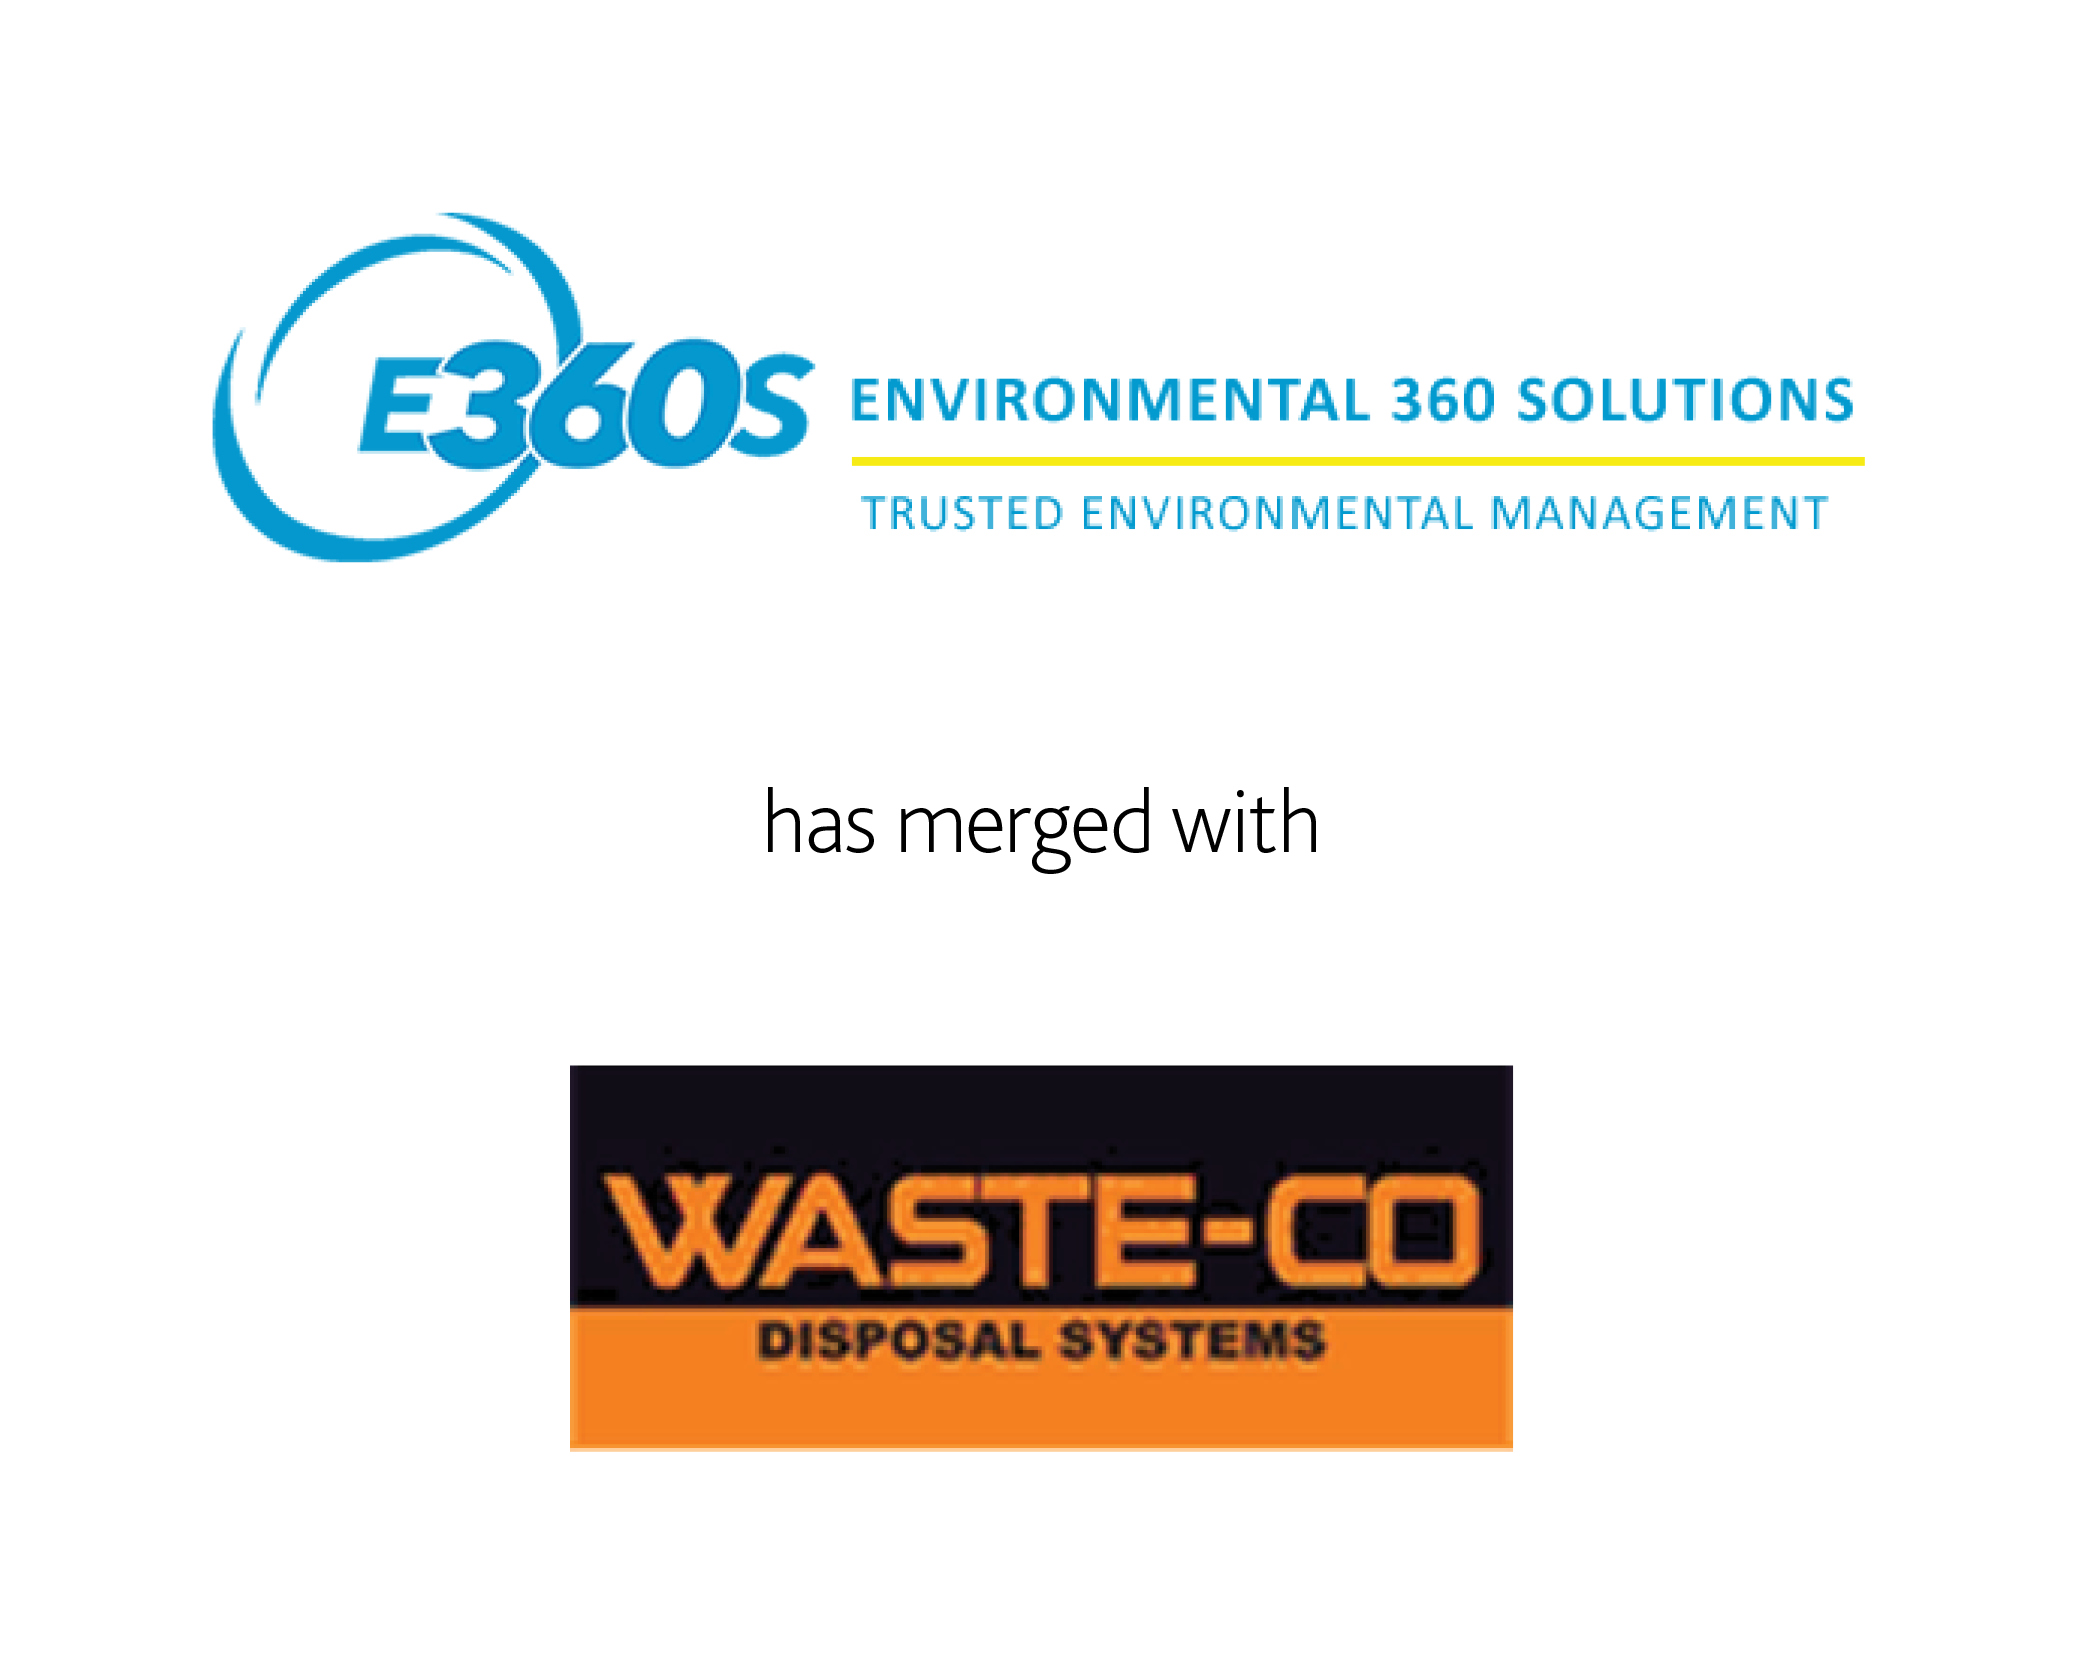 E360s Environmental 360 solutions has merged with Waste-Co Disposal Systems